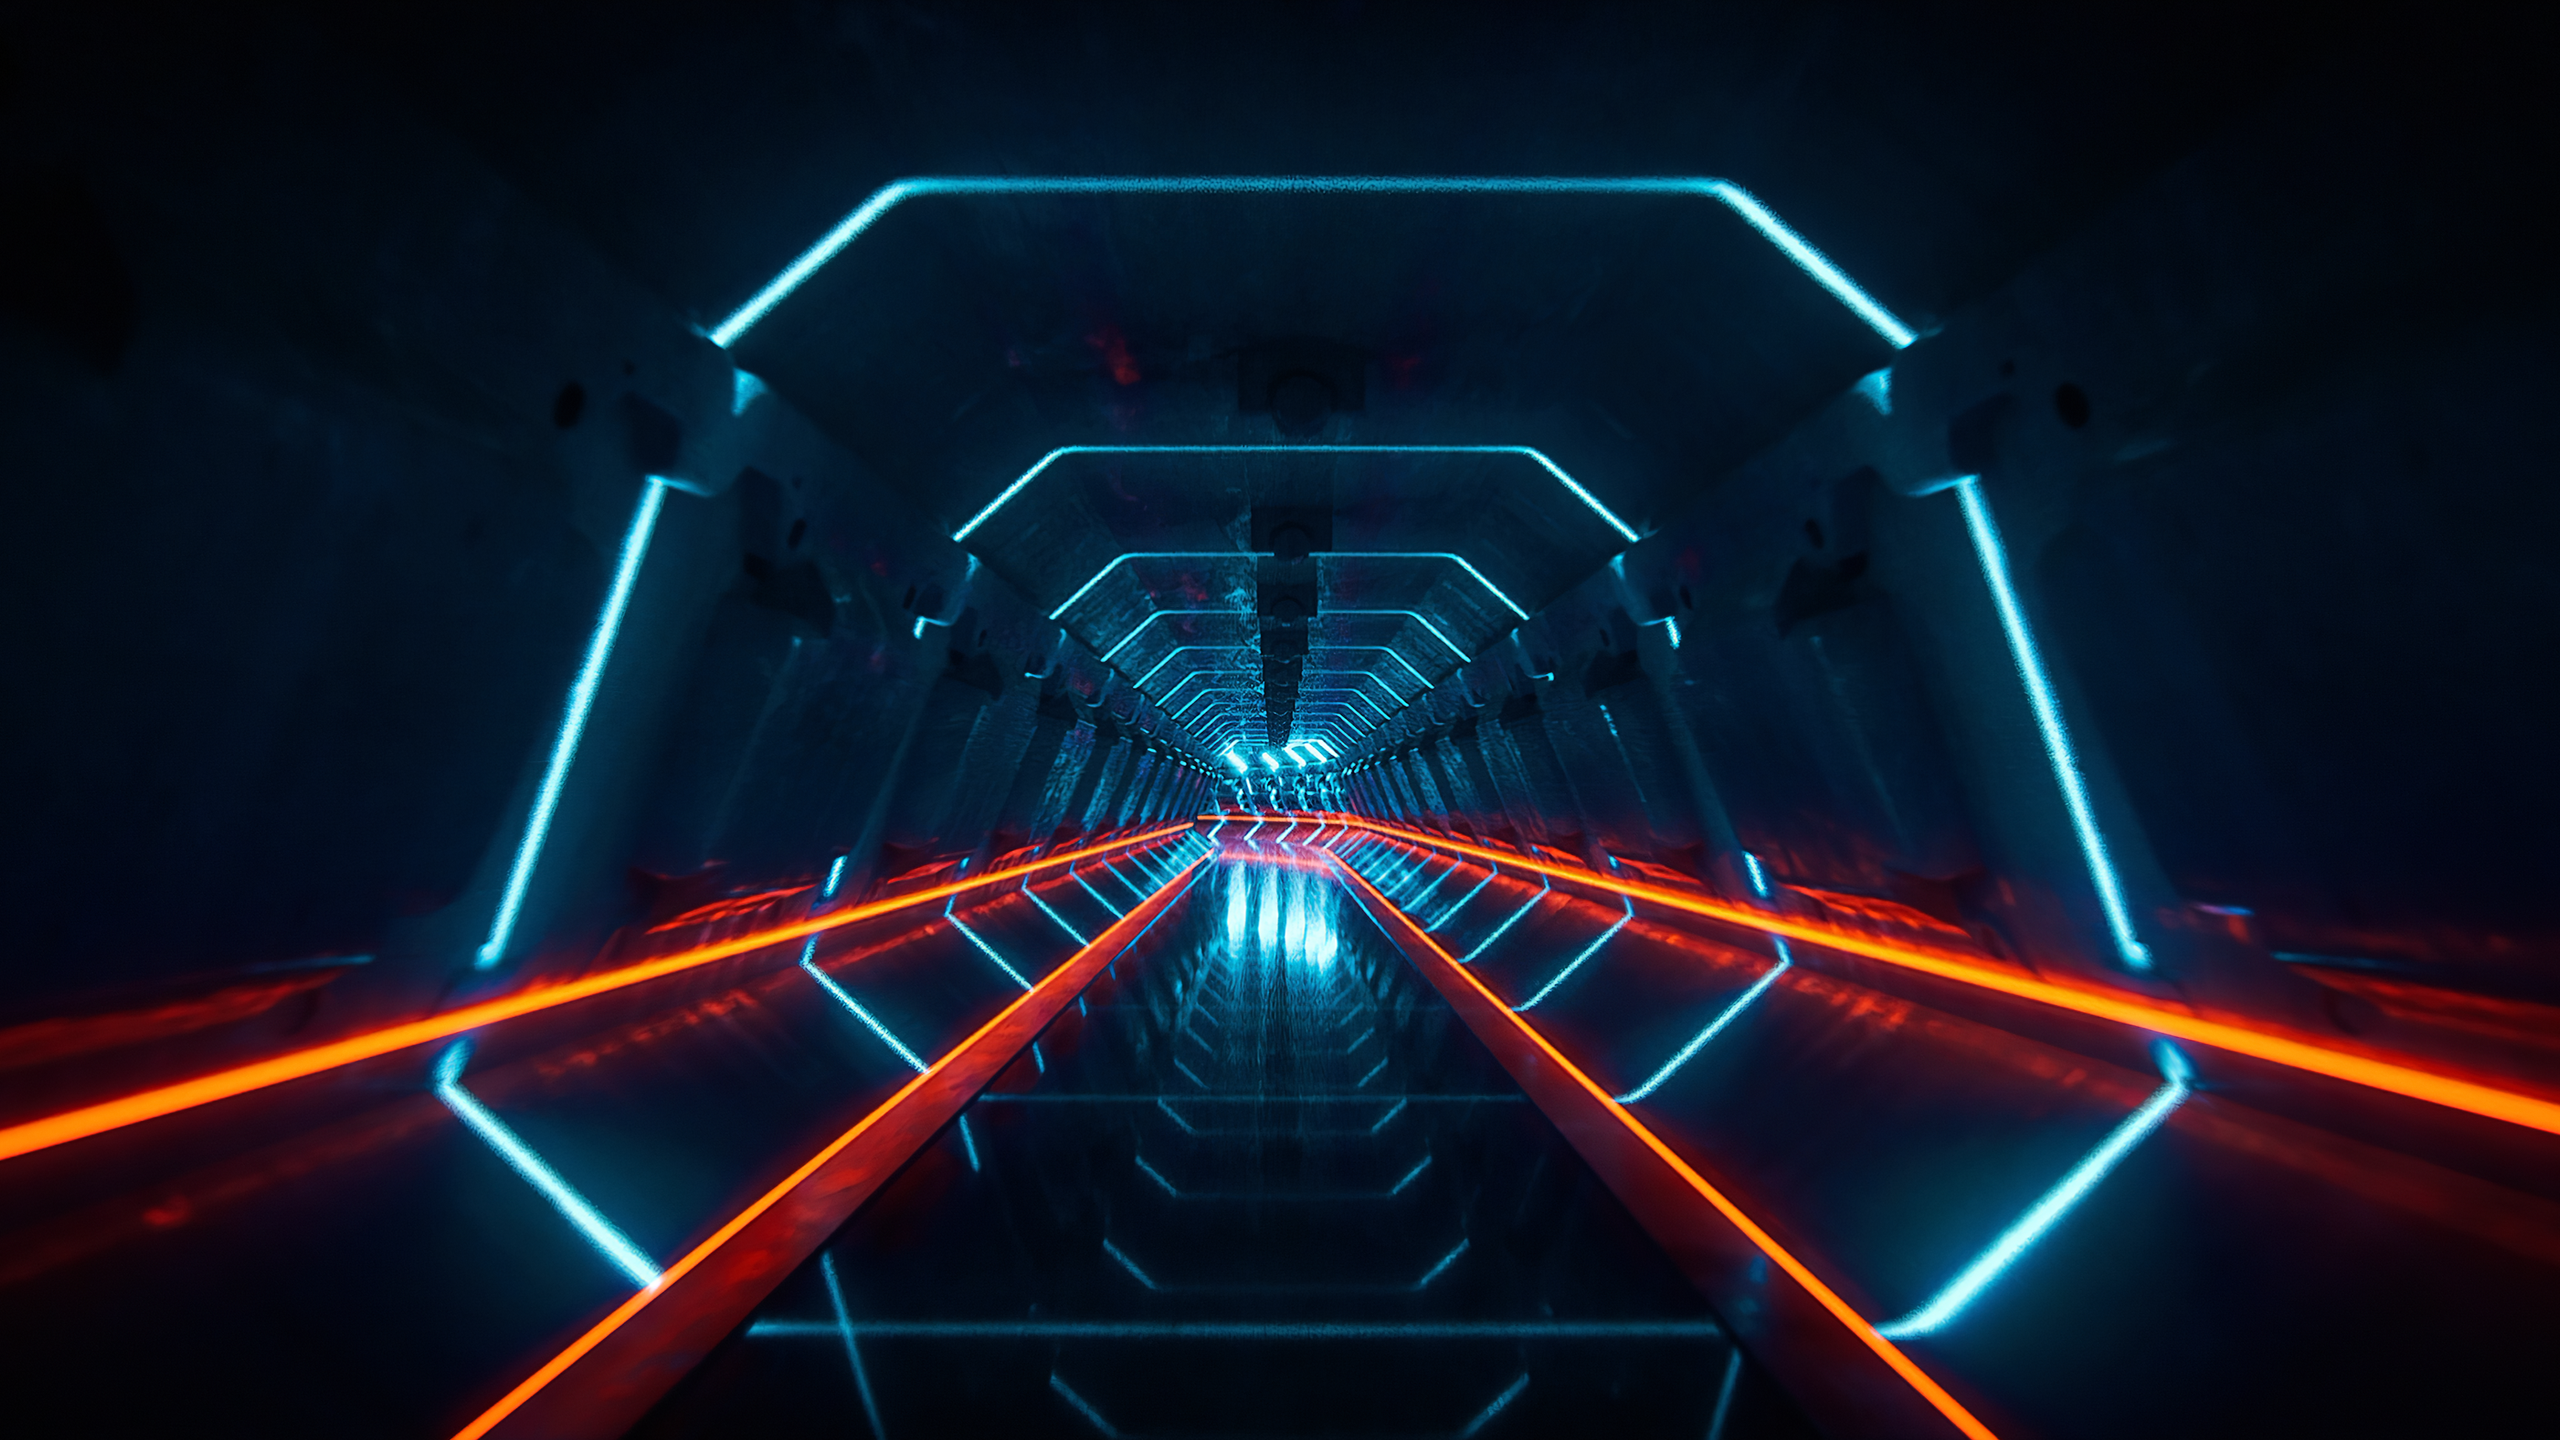 General 2560x1440 tunnel lights artwork neon science fiction